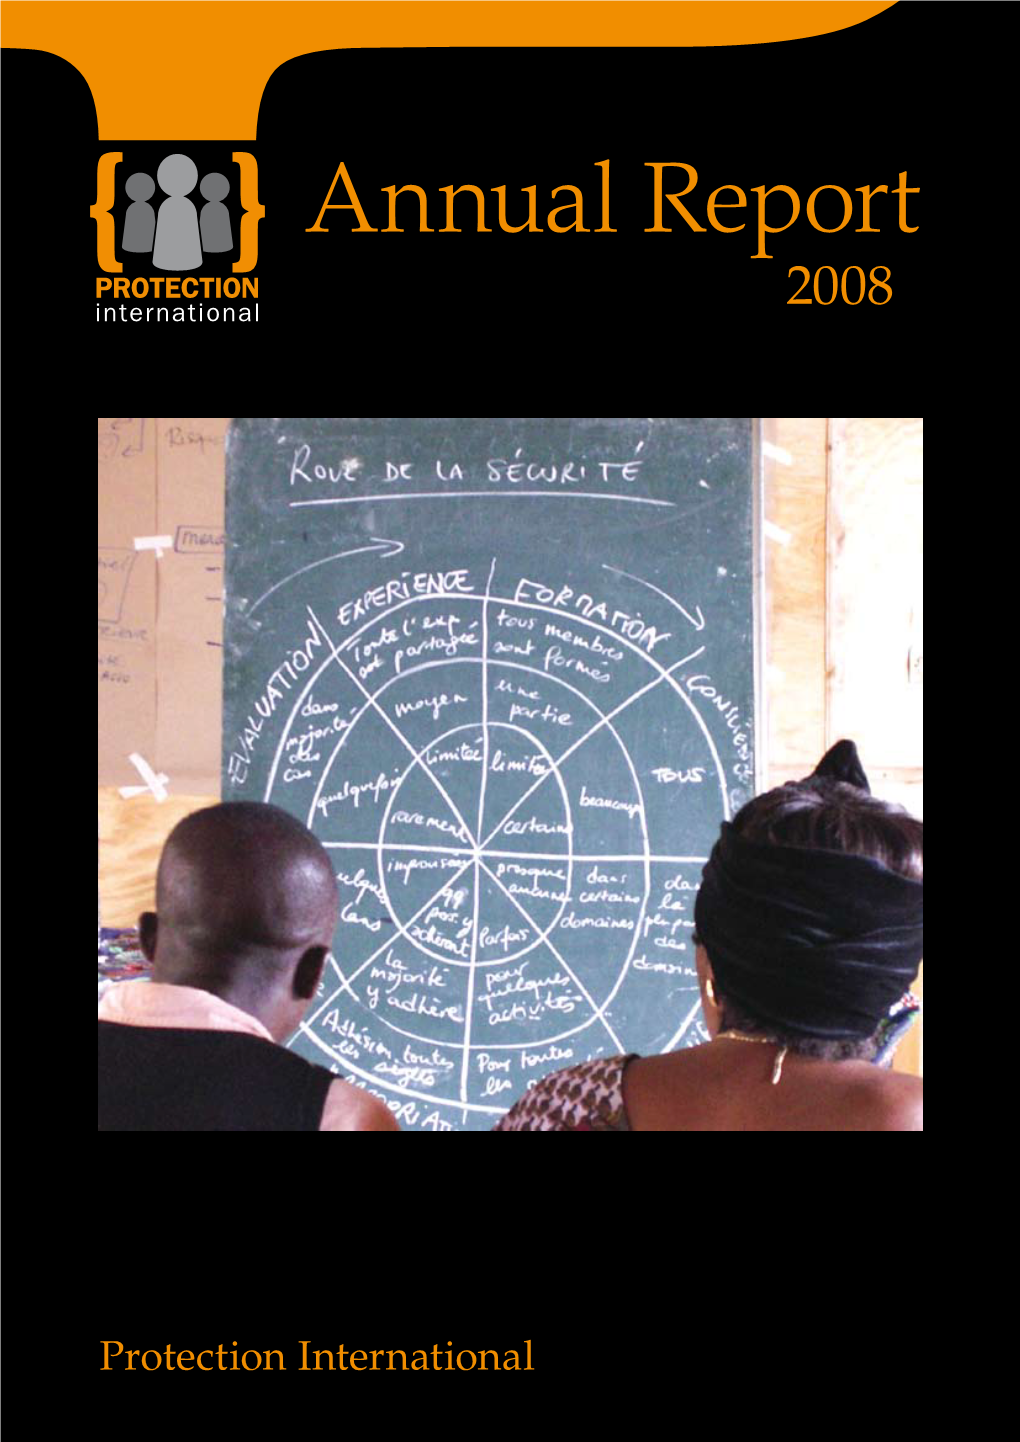 Annual Report PROTECTION International 2008